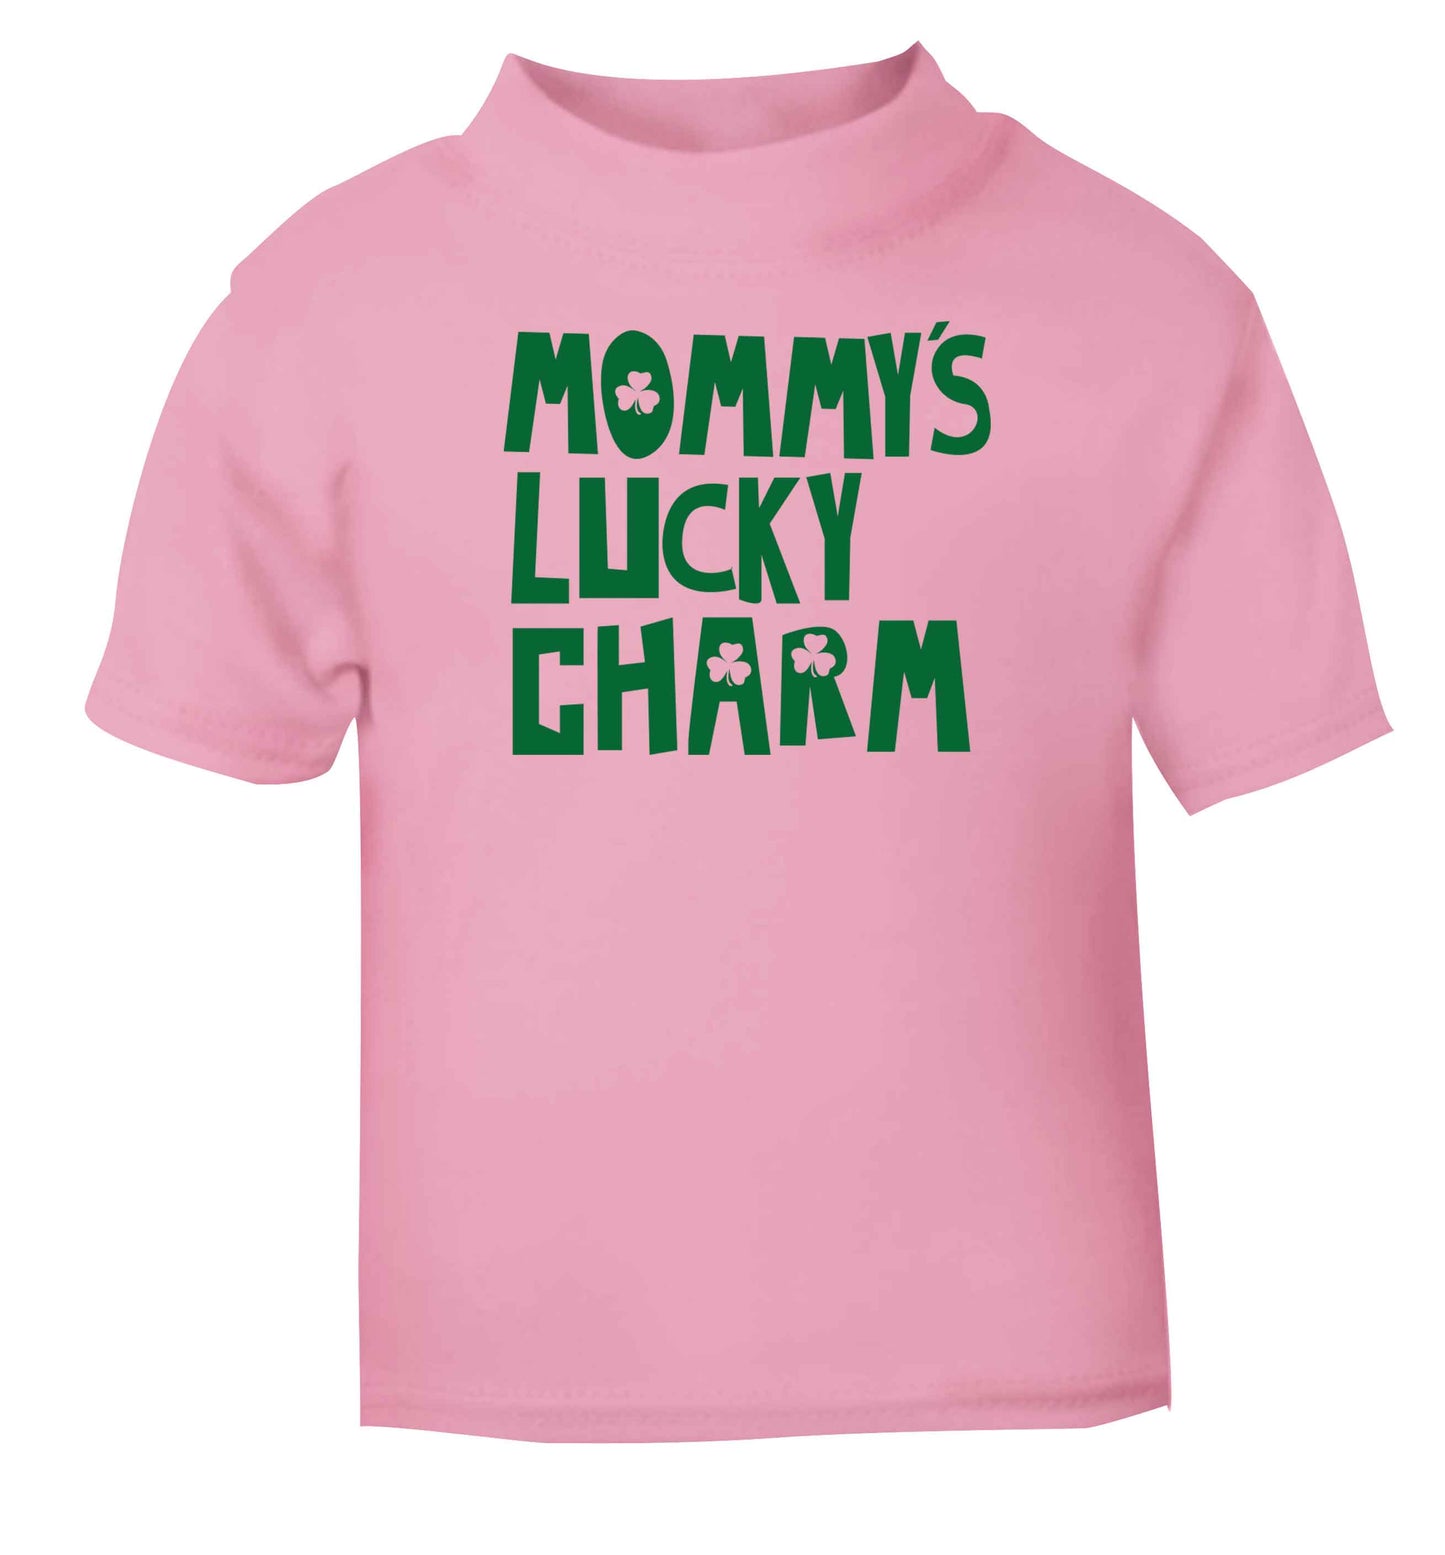 Mommy's lucky charm light pink baby toddler Tshirt 2 Years